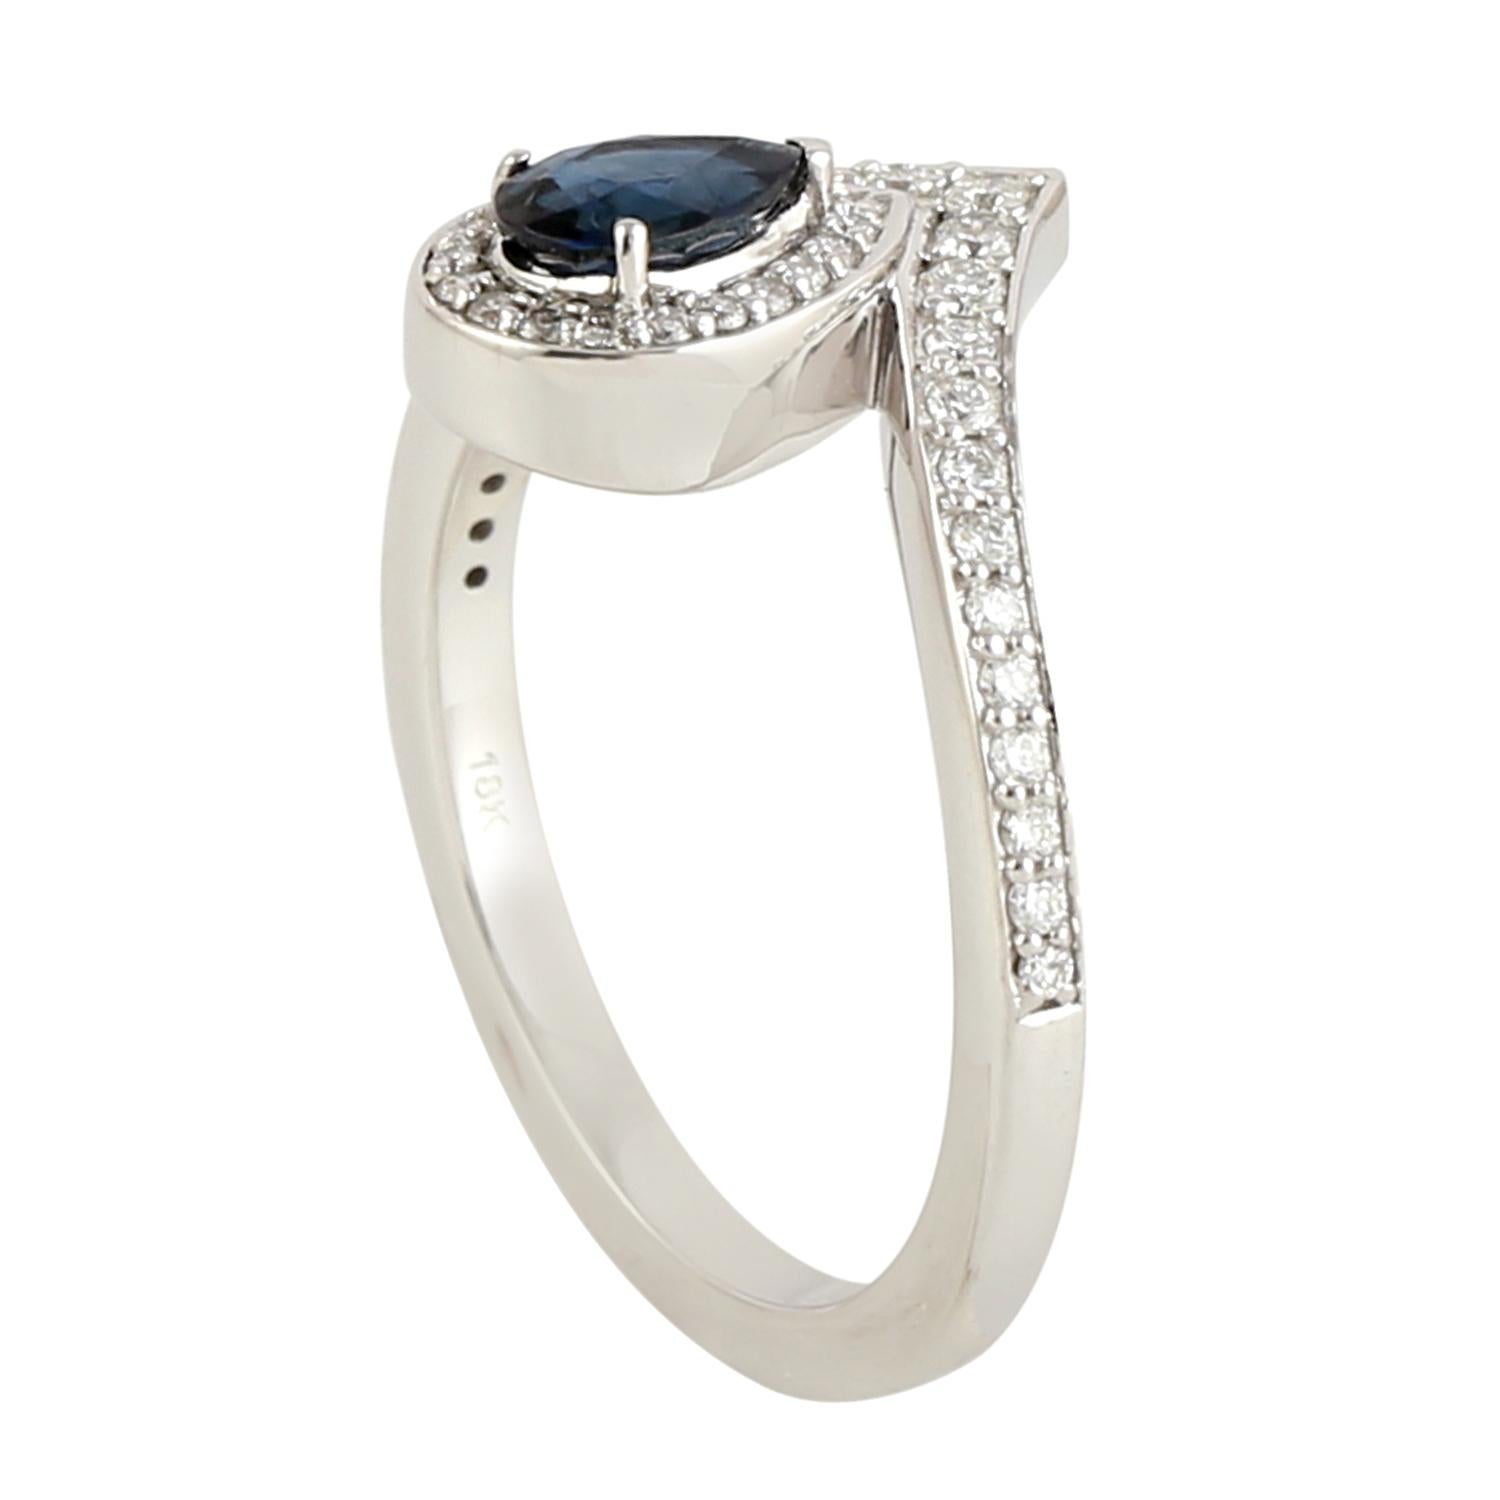 Art Deco Pear Shaped Blue Sapphire Ring With Pave Diamonds Made in 18k White Gold For Sale